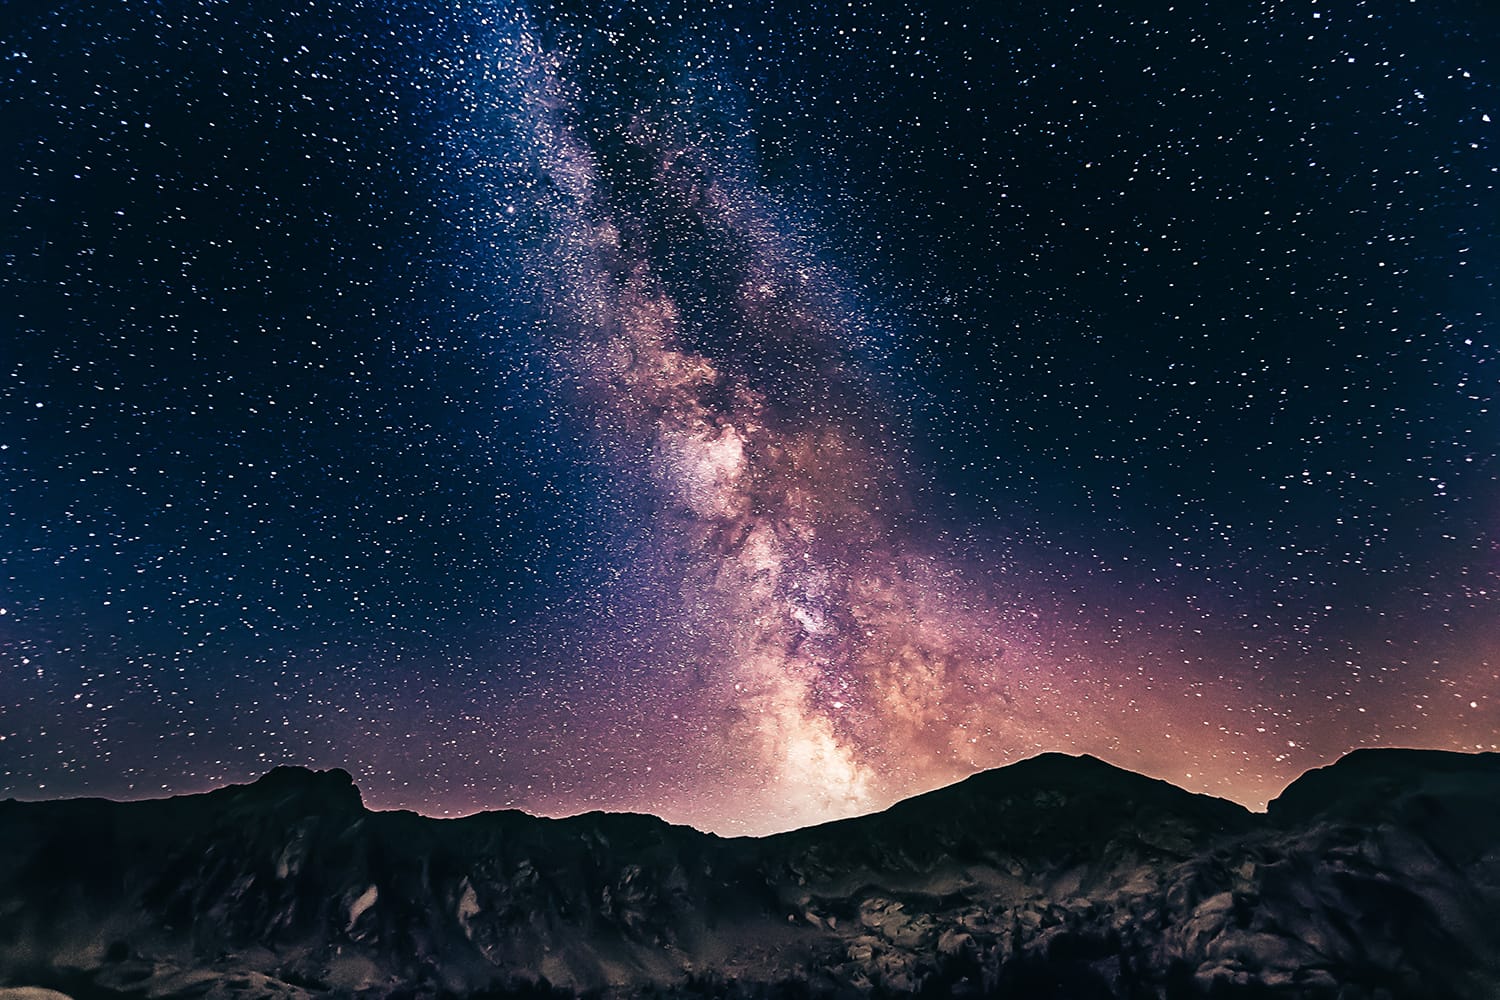 A Comprehensive Guide to Photographing the Milky Way